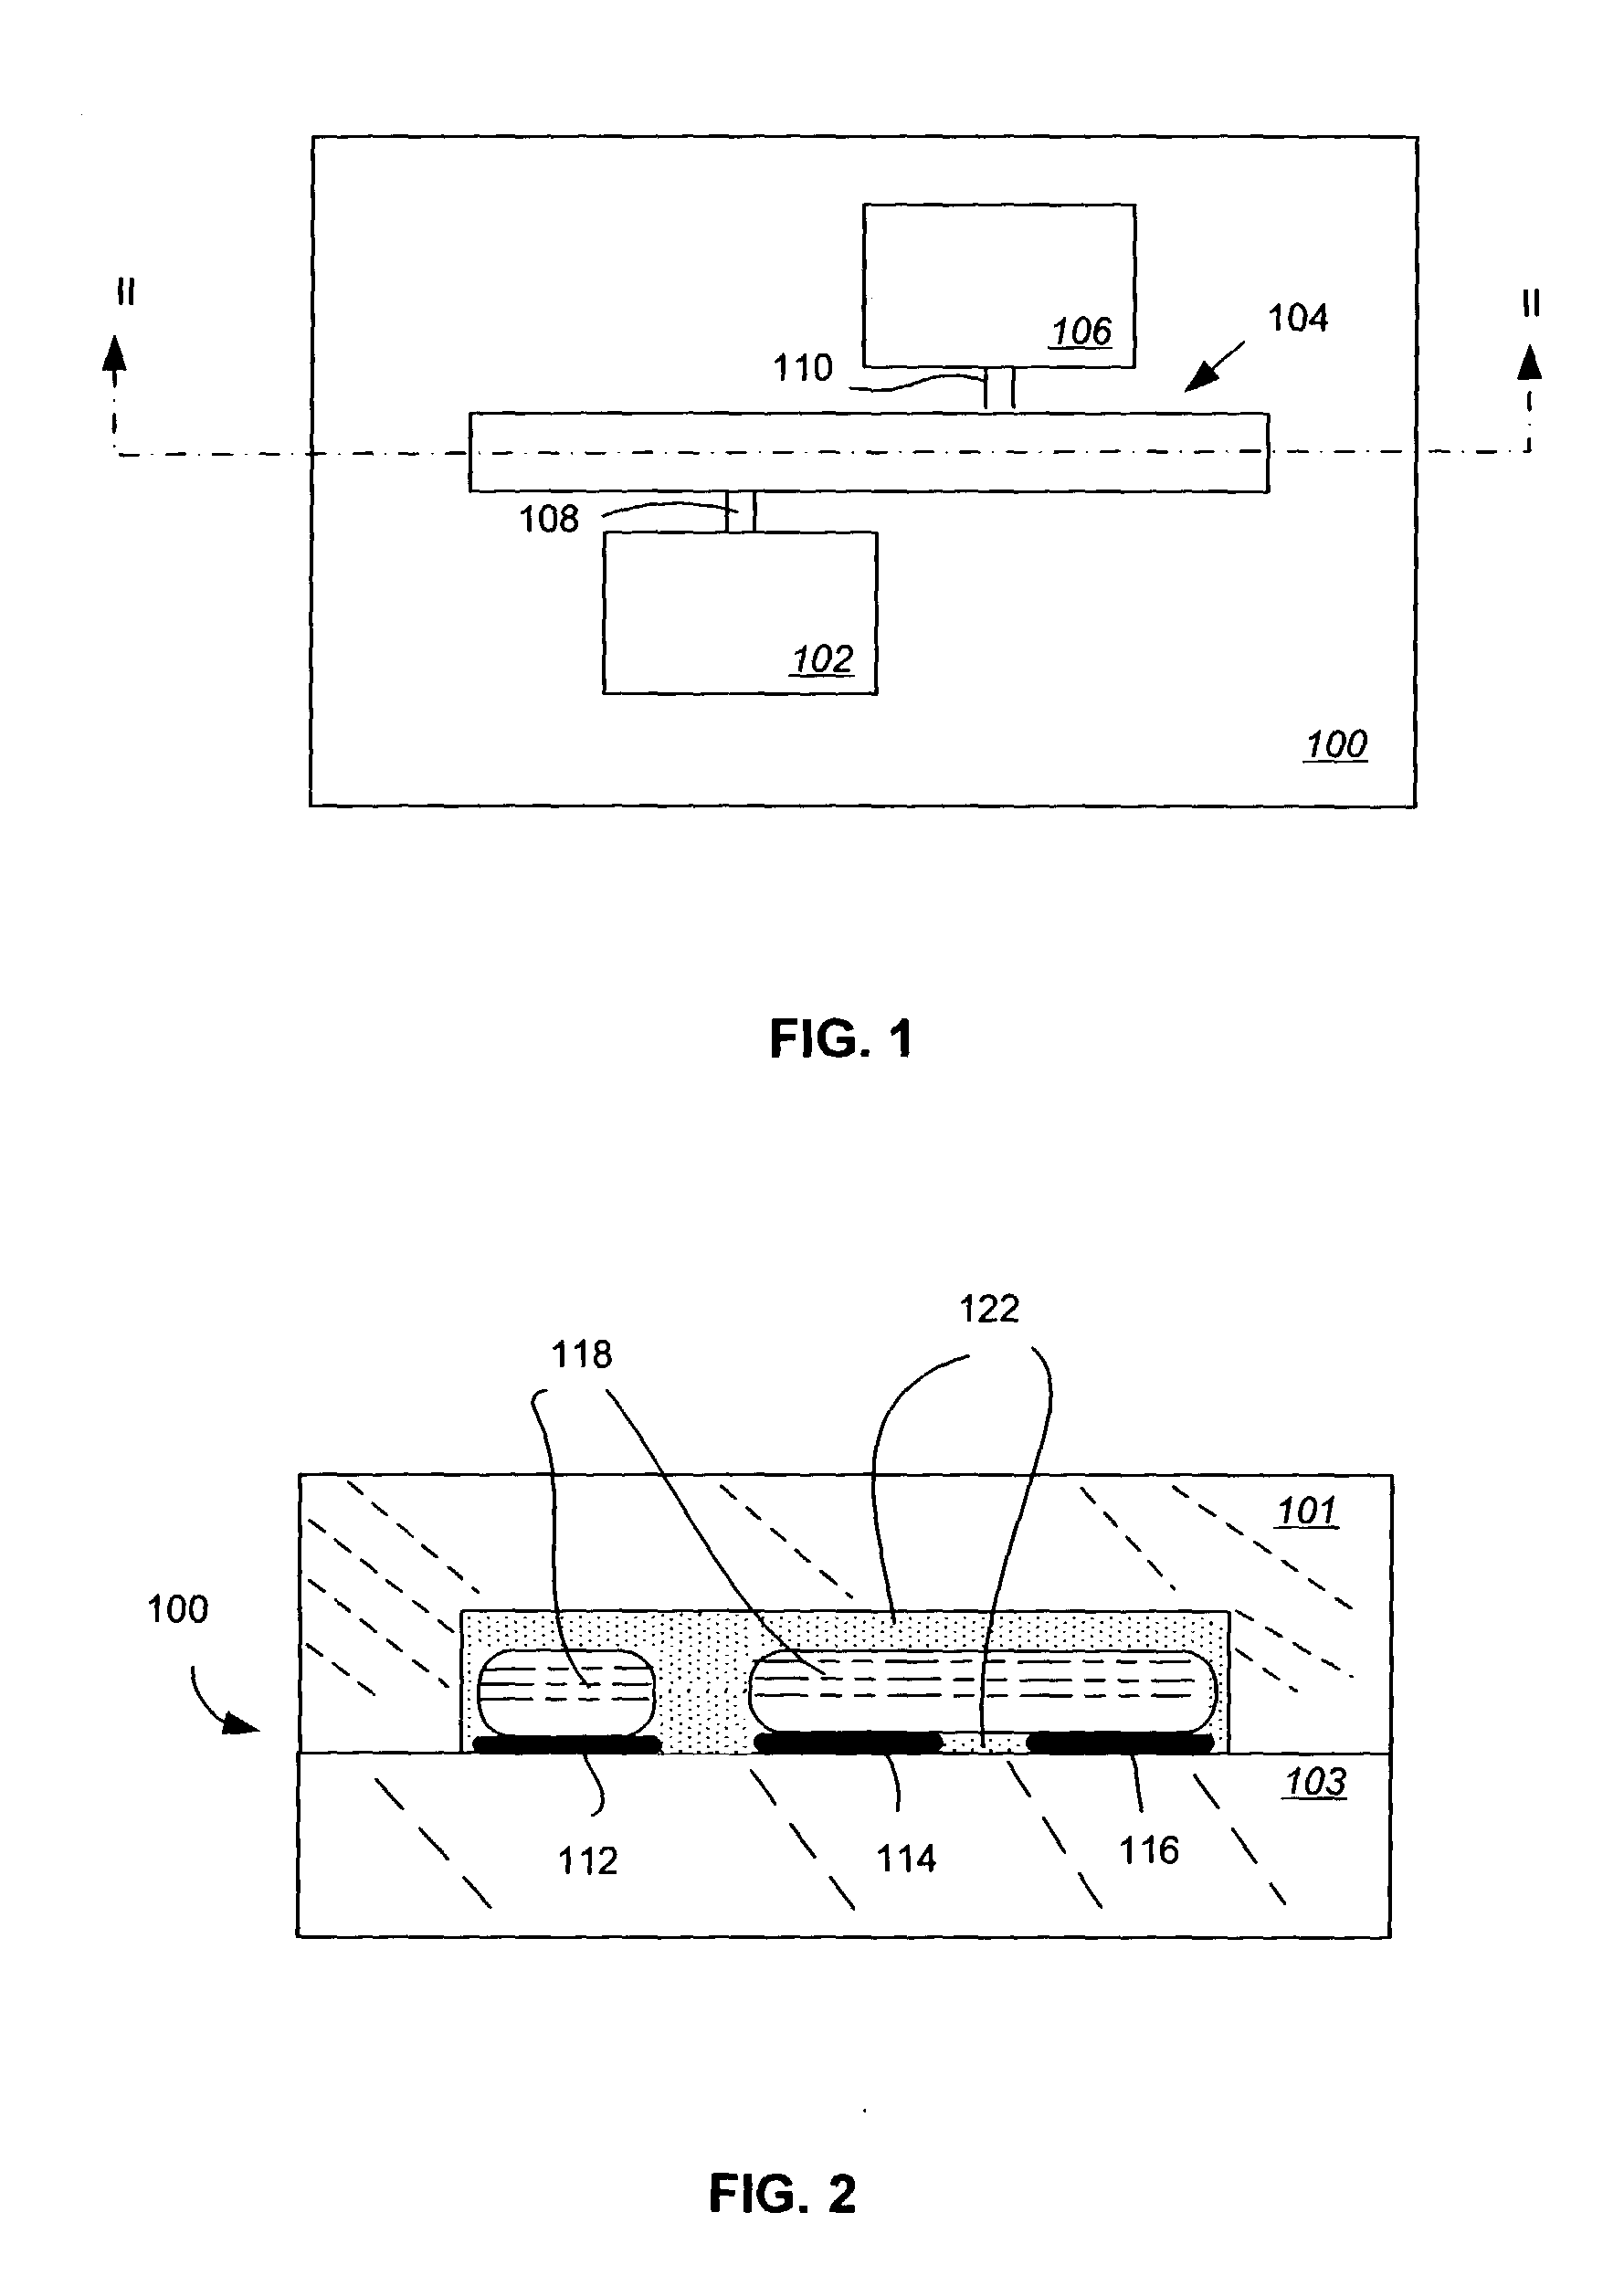 Reducing oxides on a switching fluid in a fluid-based switch